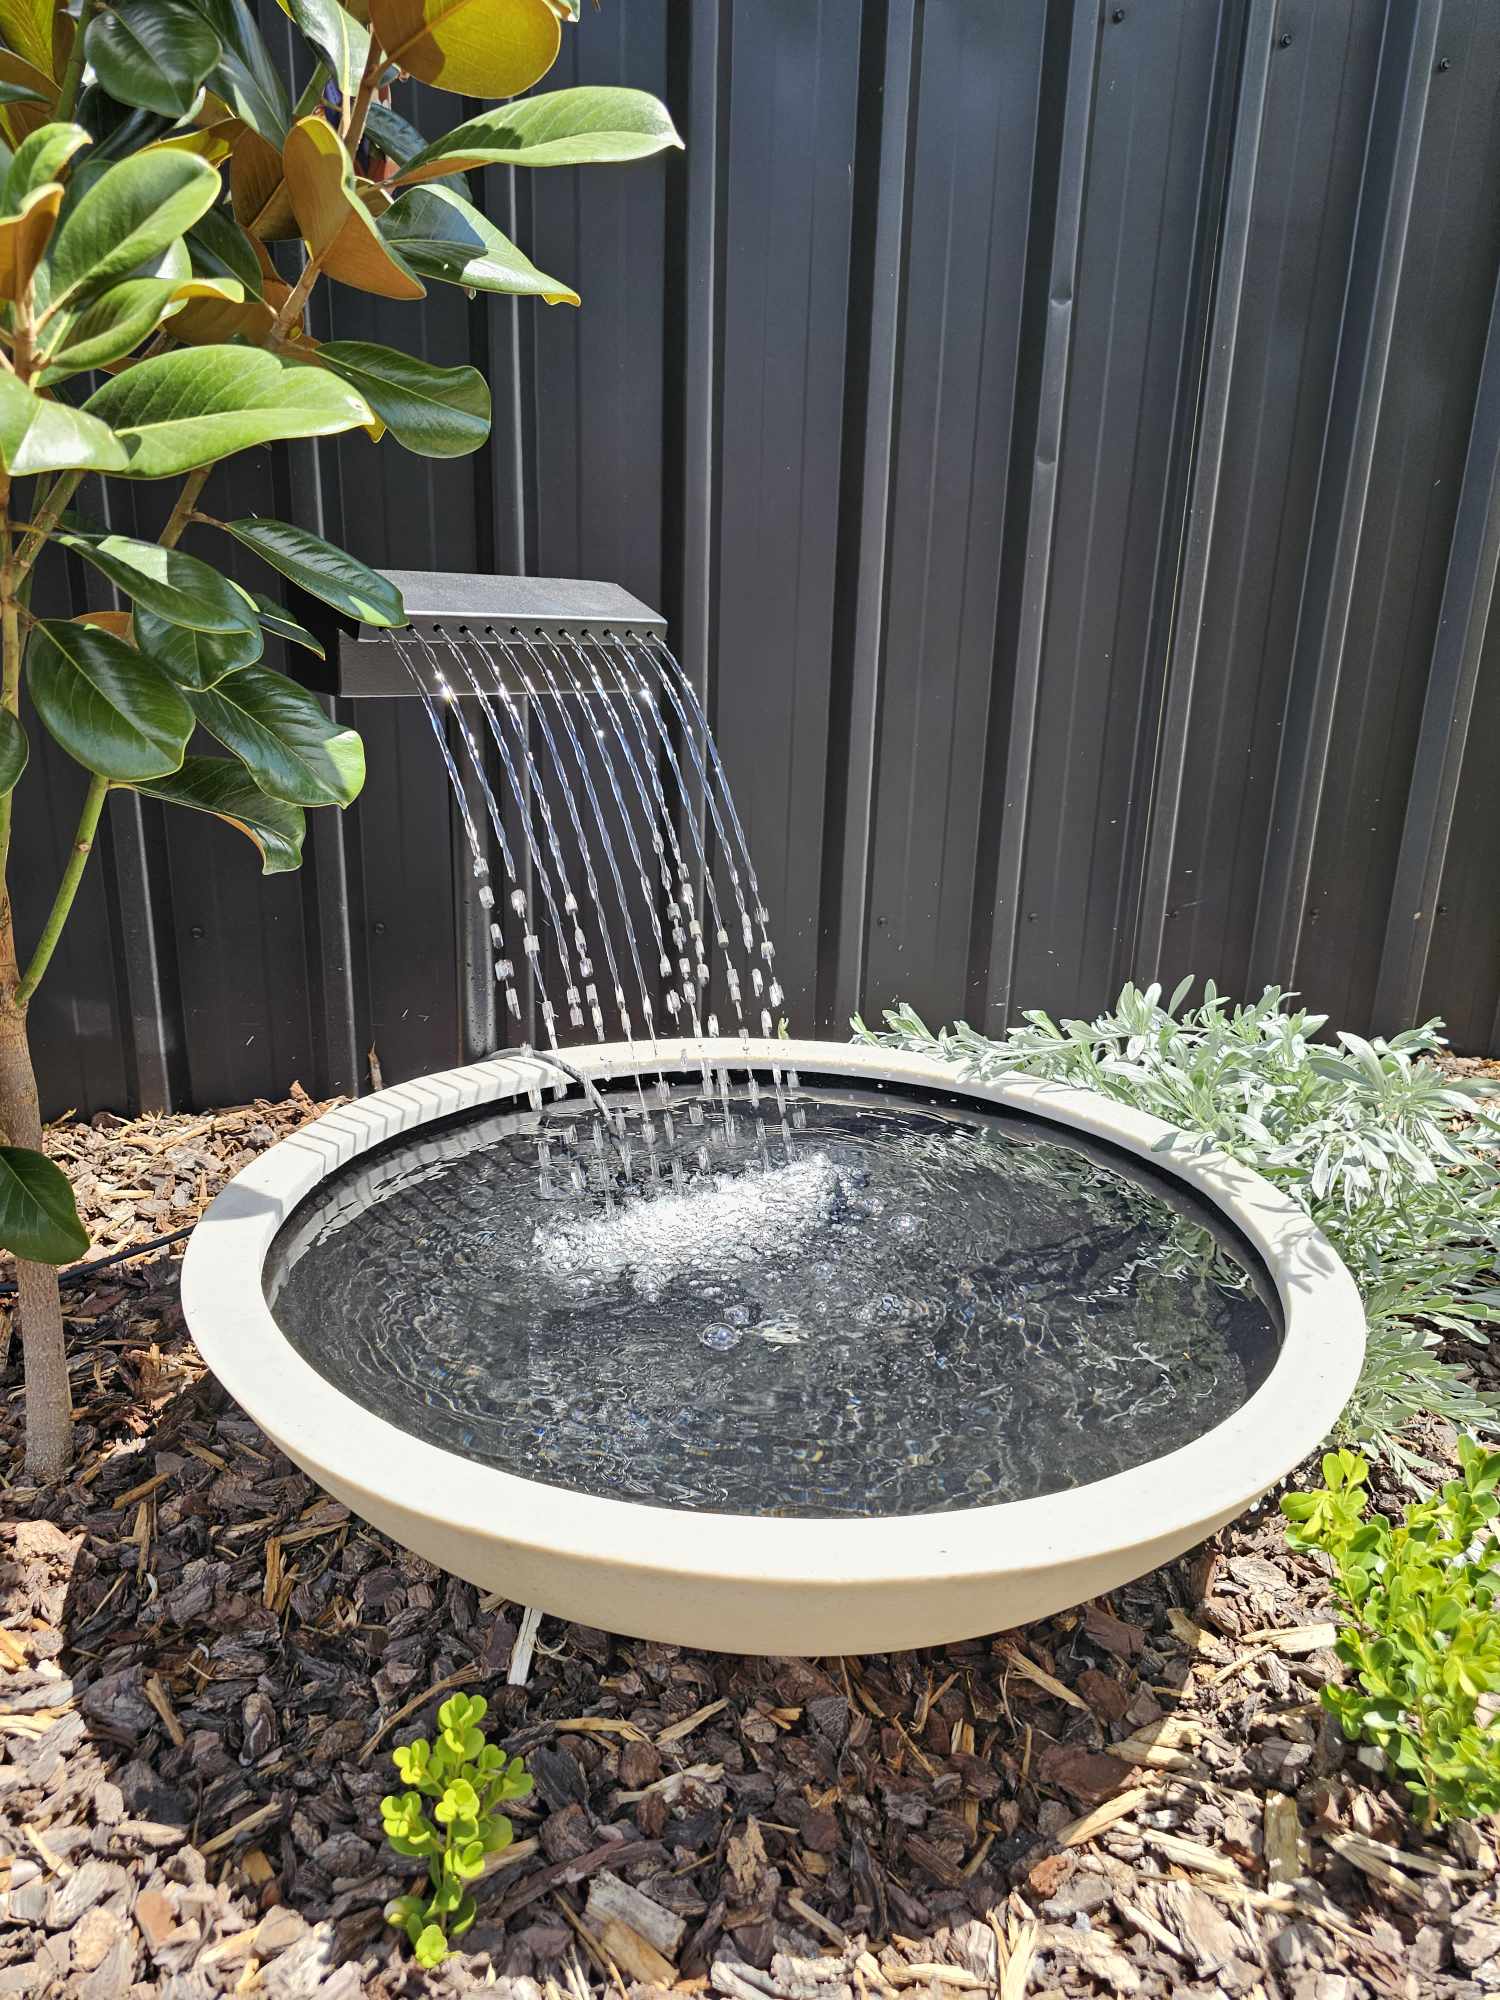 Kai "RAIN DROP" Water Feature with Urban Bowl Water Feature  